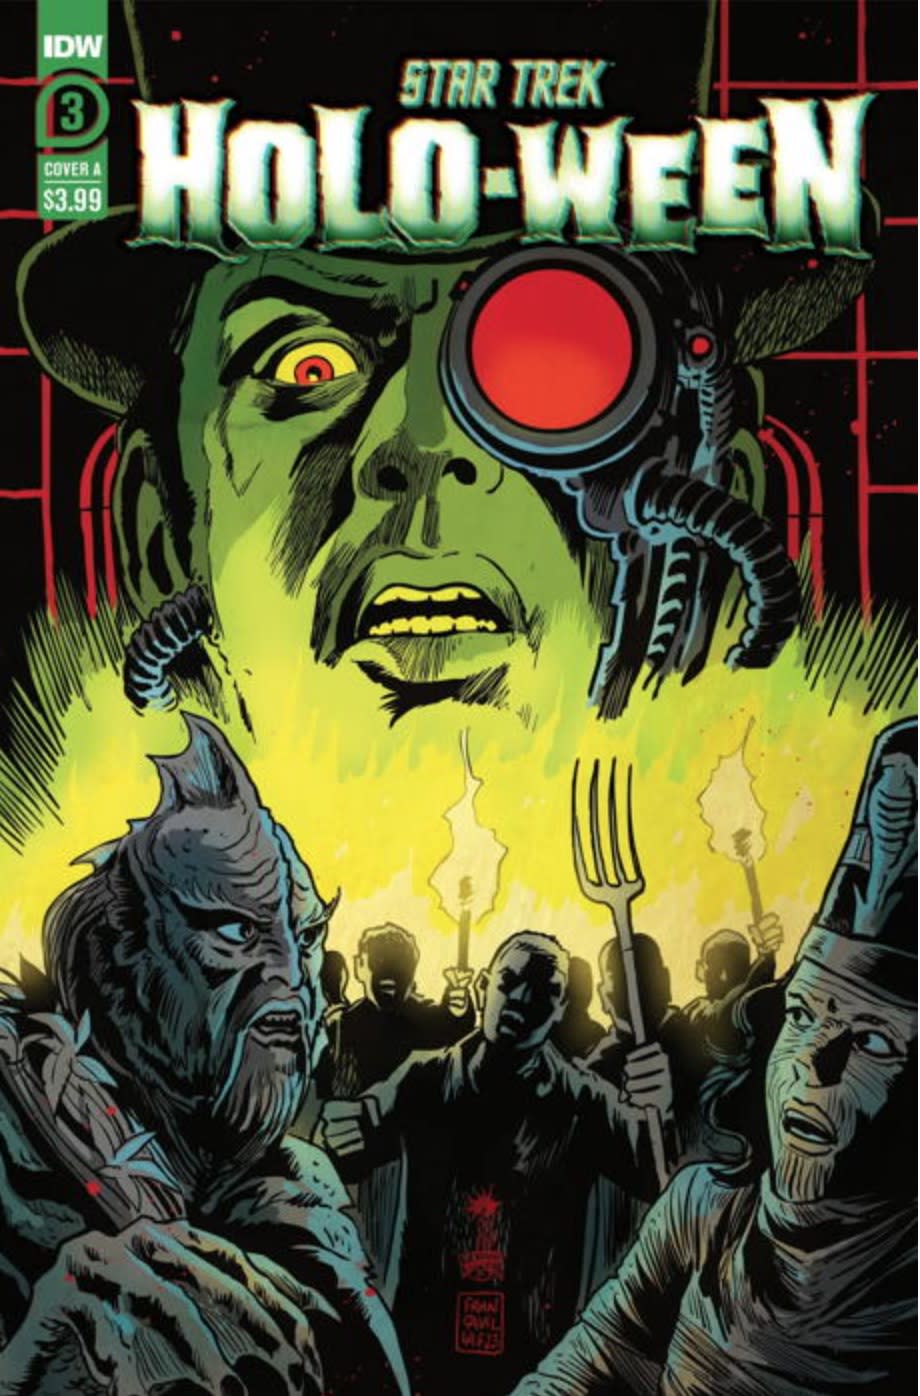 illustration showing fish-like humanoid creatures in the foreground and a large male face with a robotic red eye in the background.